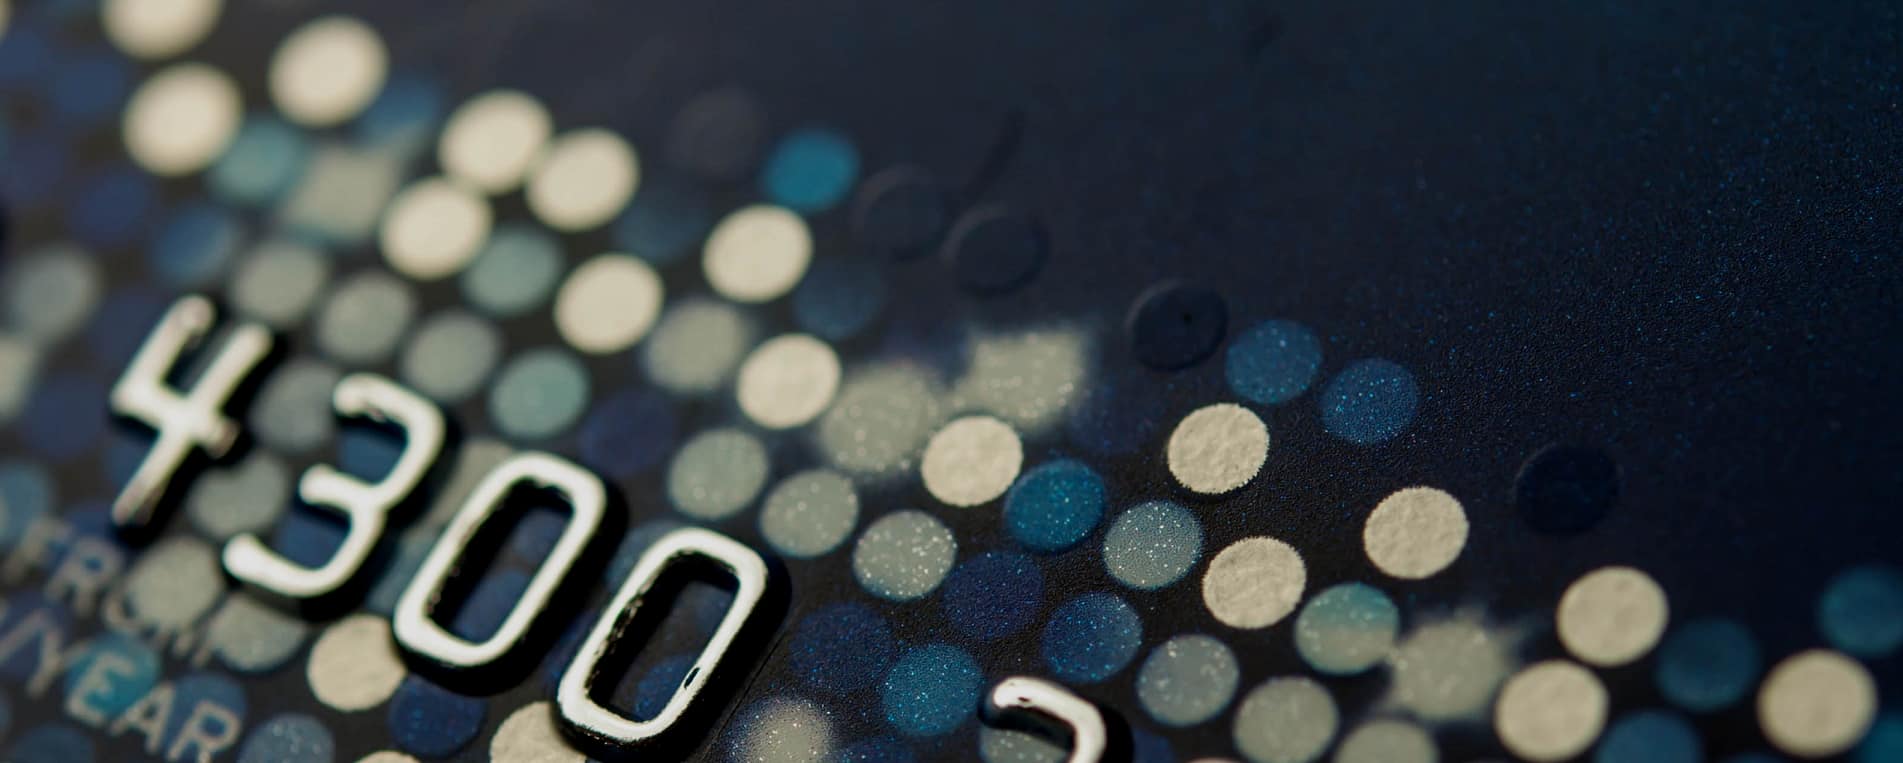 Credit card issuer gains 26 percent ROI with automation framework